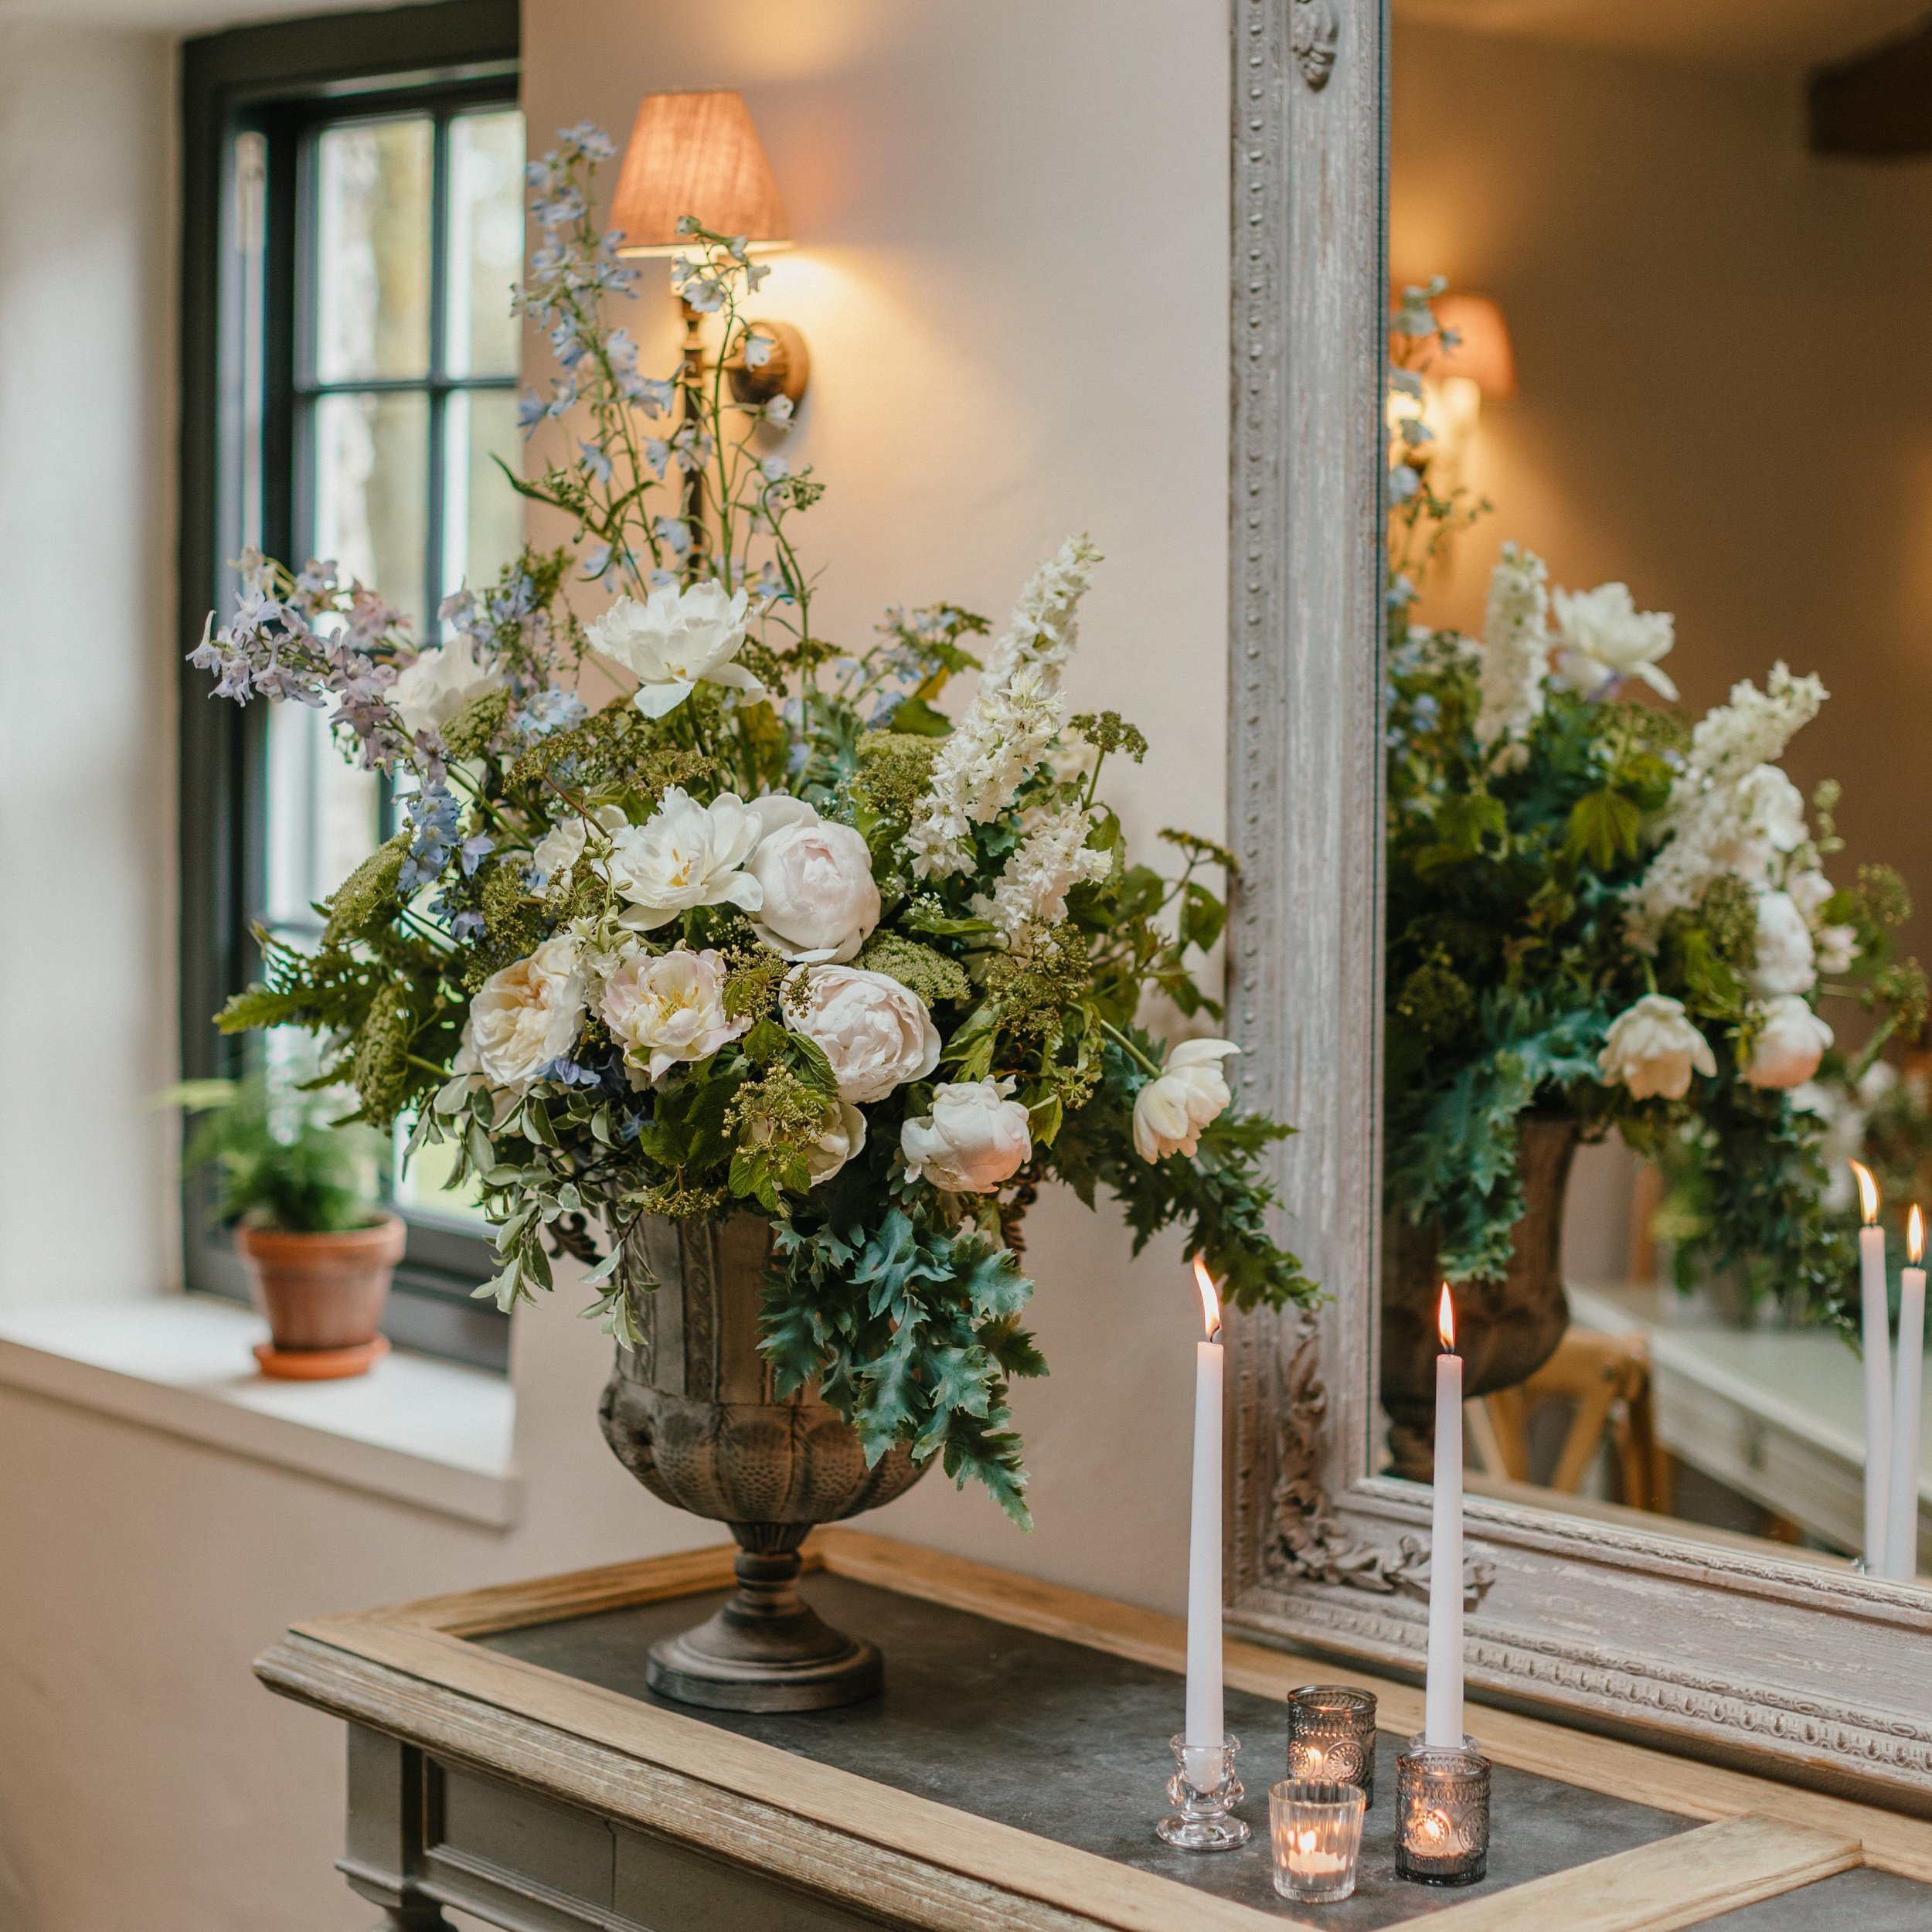 Urns are one of my favourite arrangements to design and create. 

So versatile for size, shape and positioning. They create a beautiful focal point individually, paired or grouped, and can be moved around your ceremony and wedding breakfast spaces. A